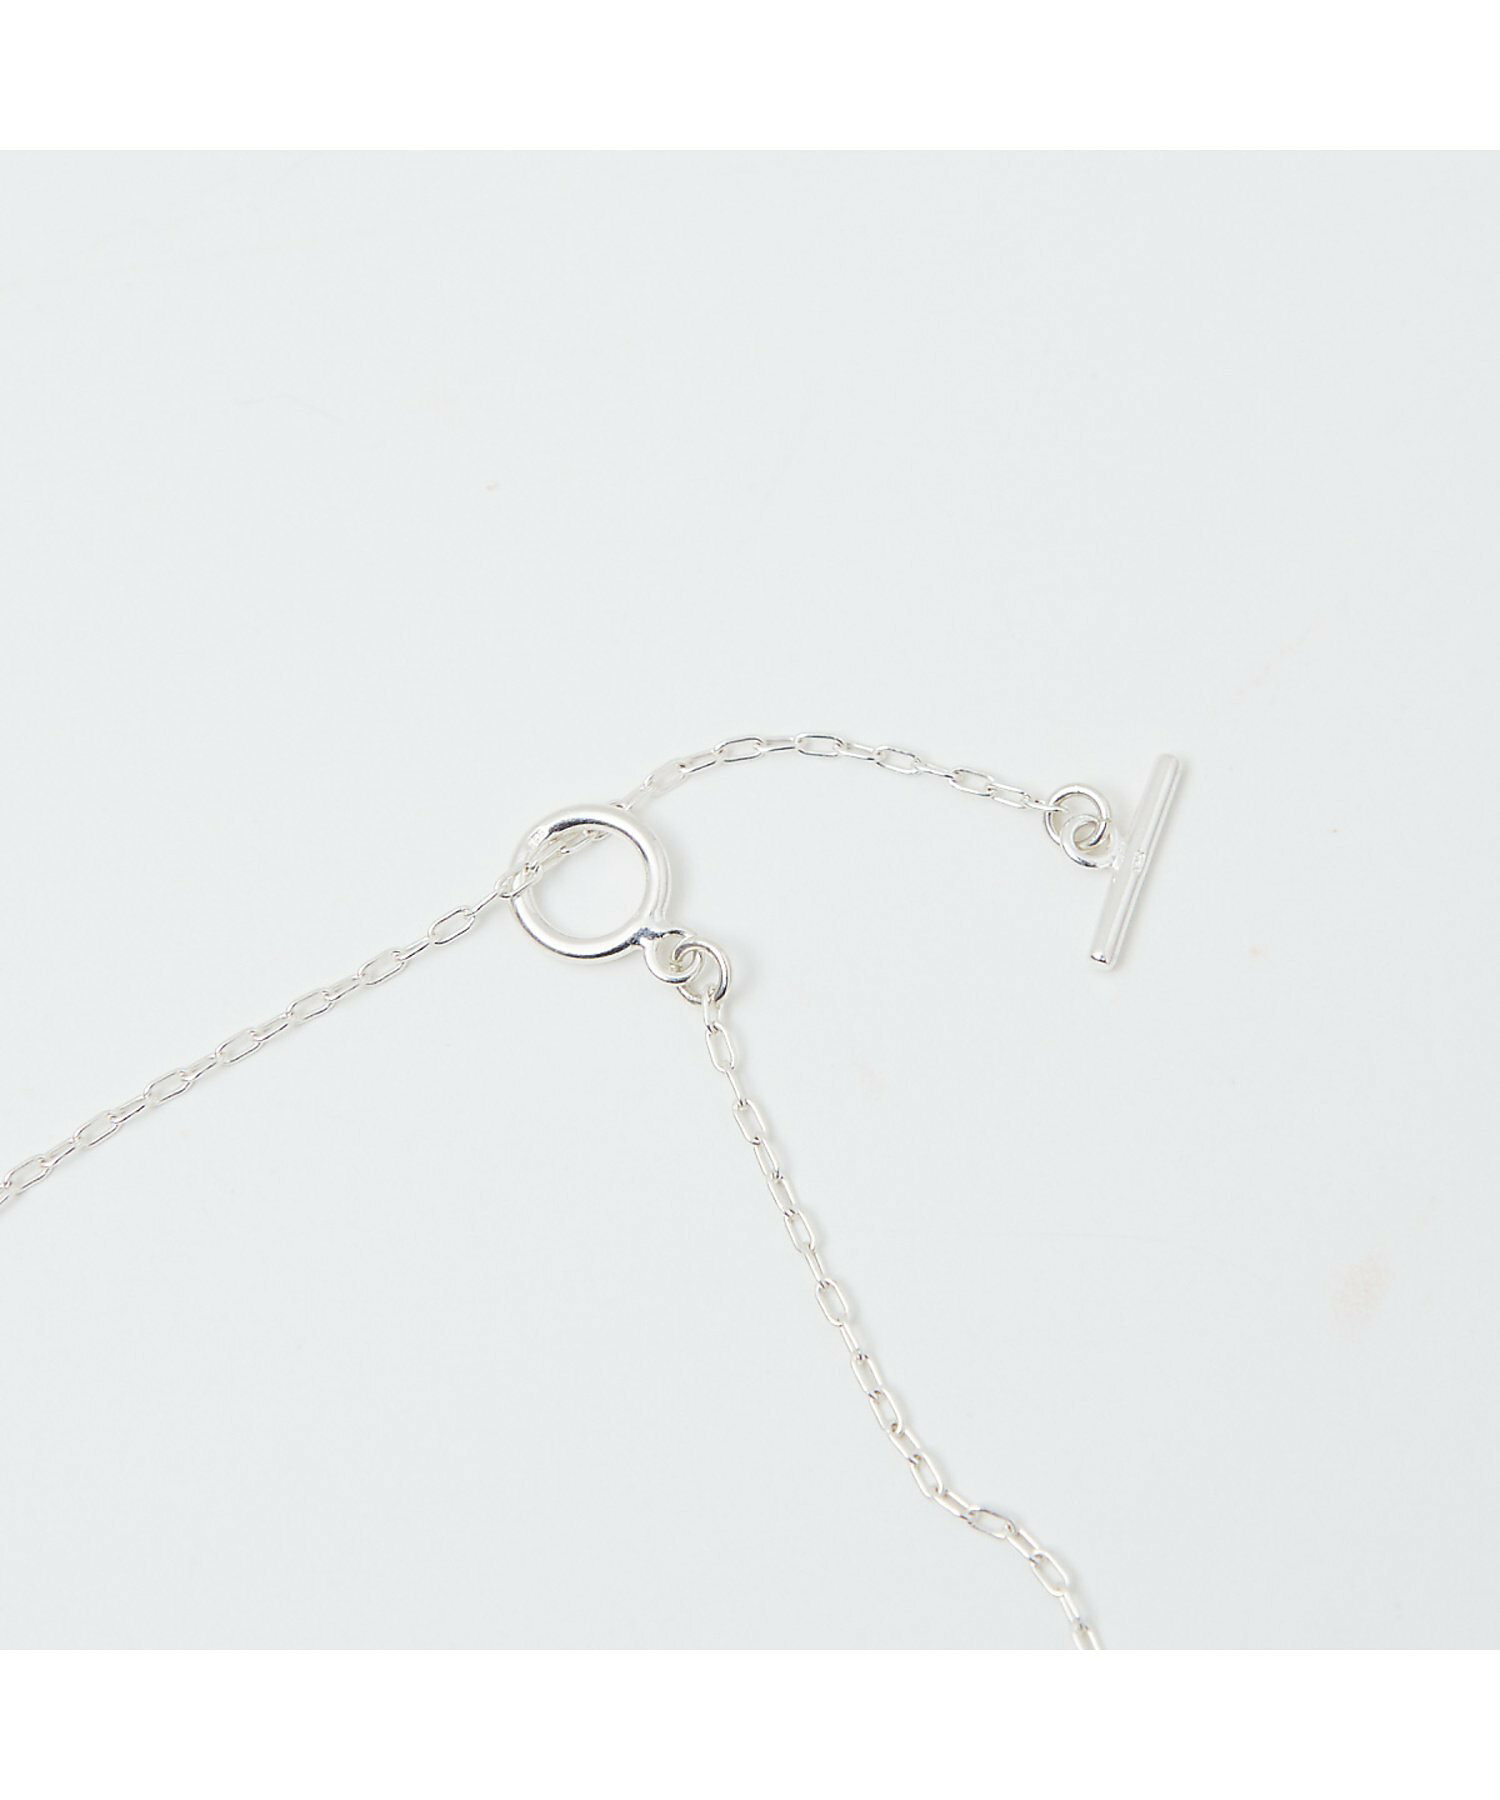 【Lemme./レム】Roni Bibble Necklace ネックレス SI